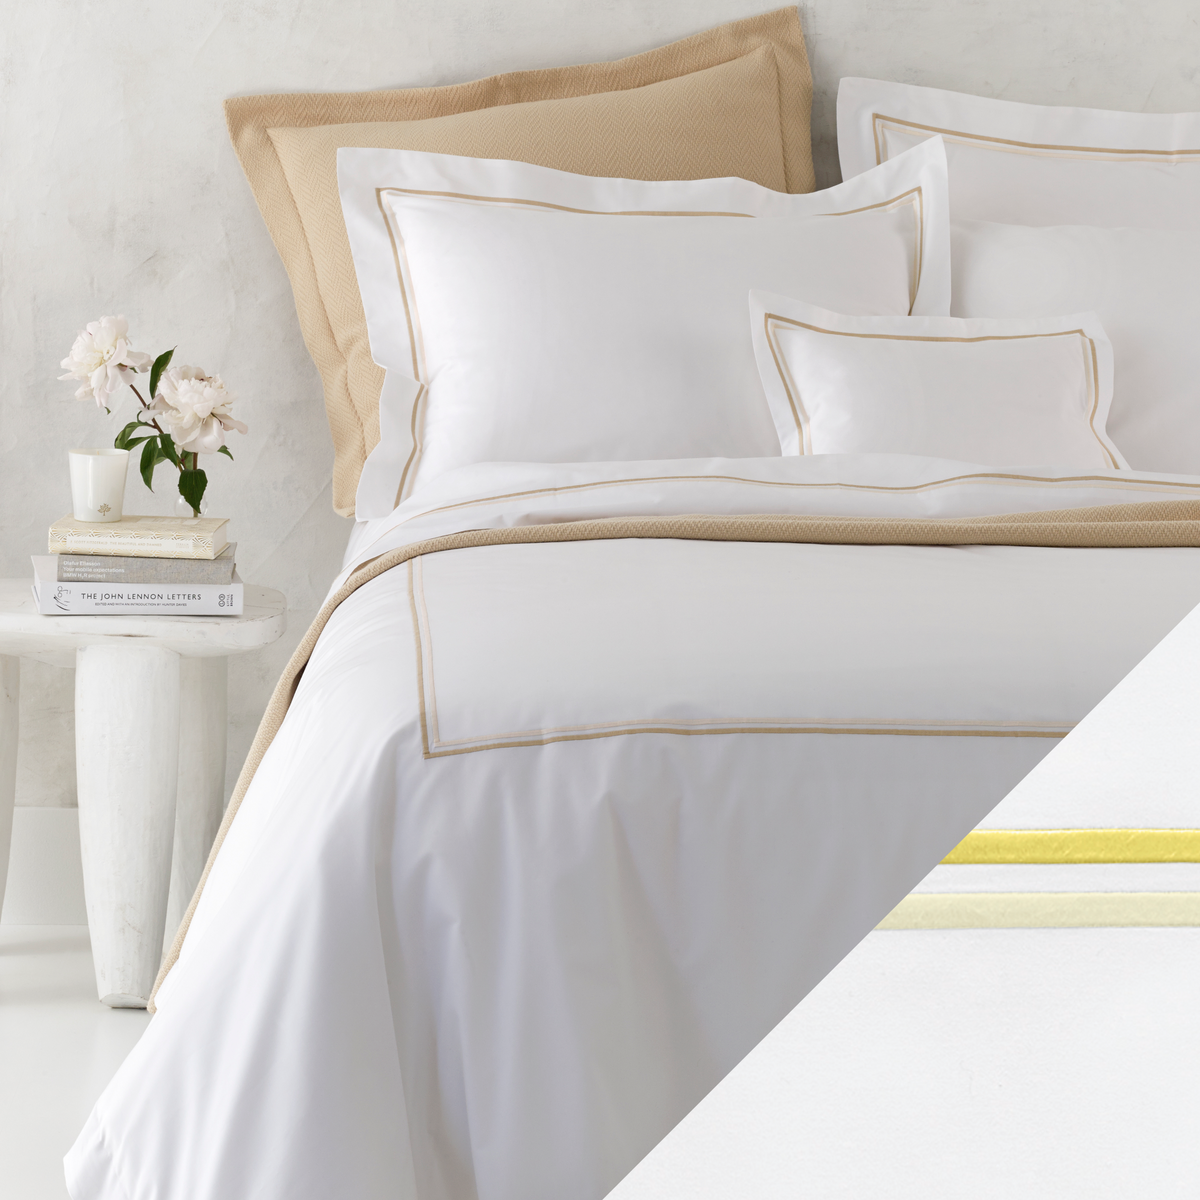 Full Bedding with Swatch Sample of Lemon Color Matouk Essex Bedding Collection